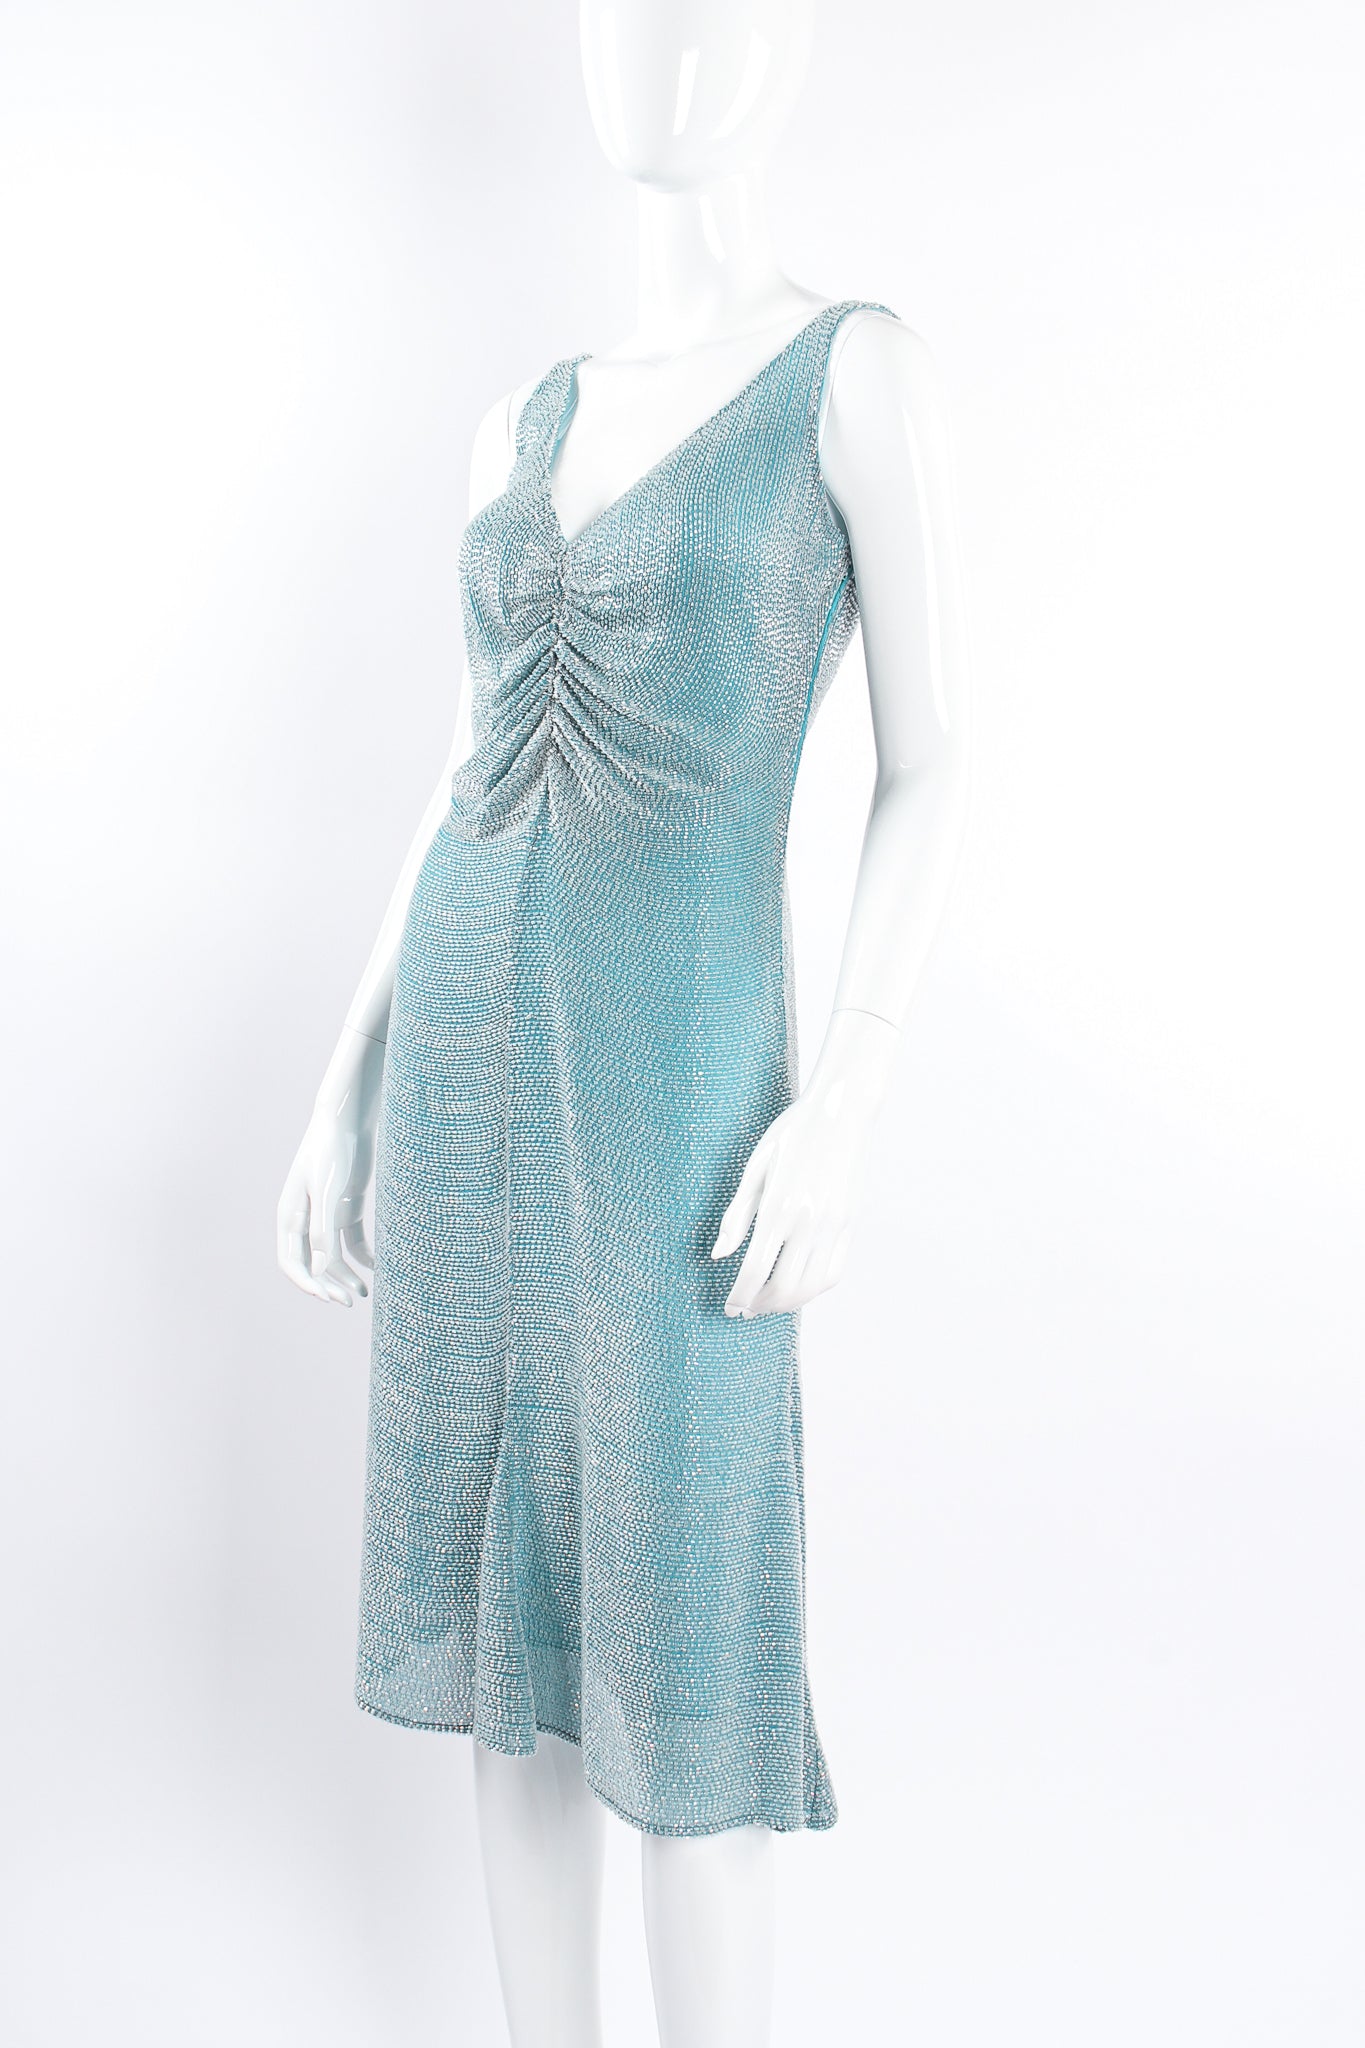 Vintage Badgley Mischka Beaded Ruched Bodice Dress on Mannequin angle at Recess Los Angeles